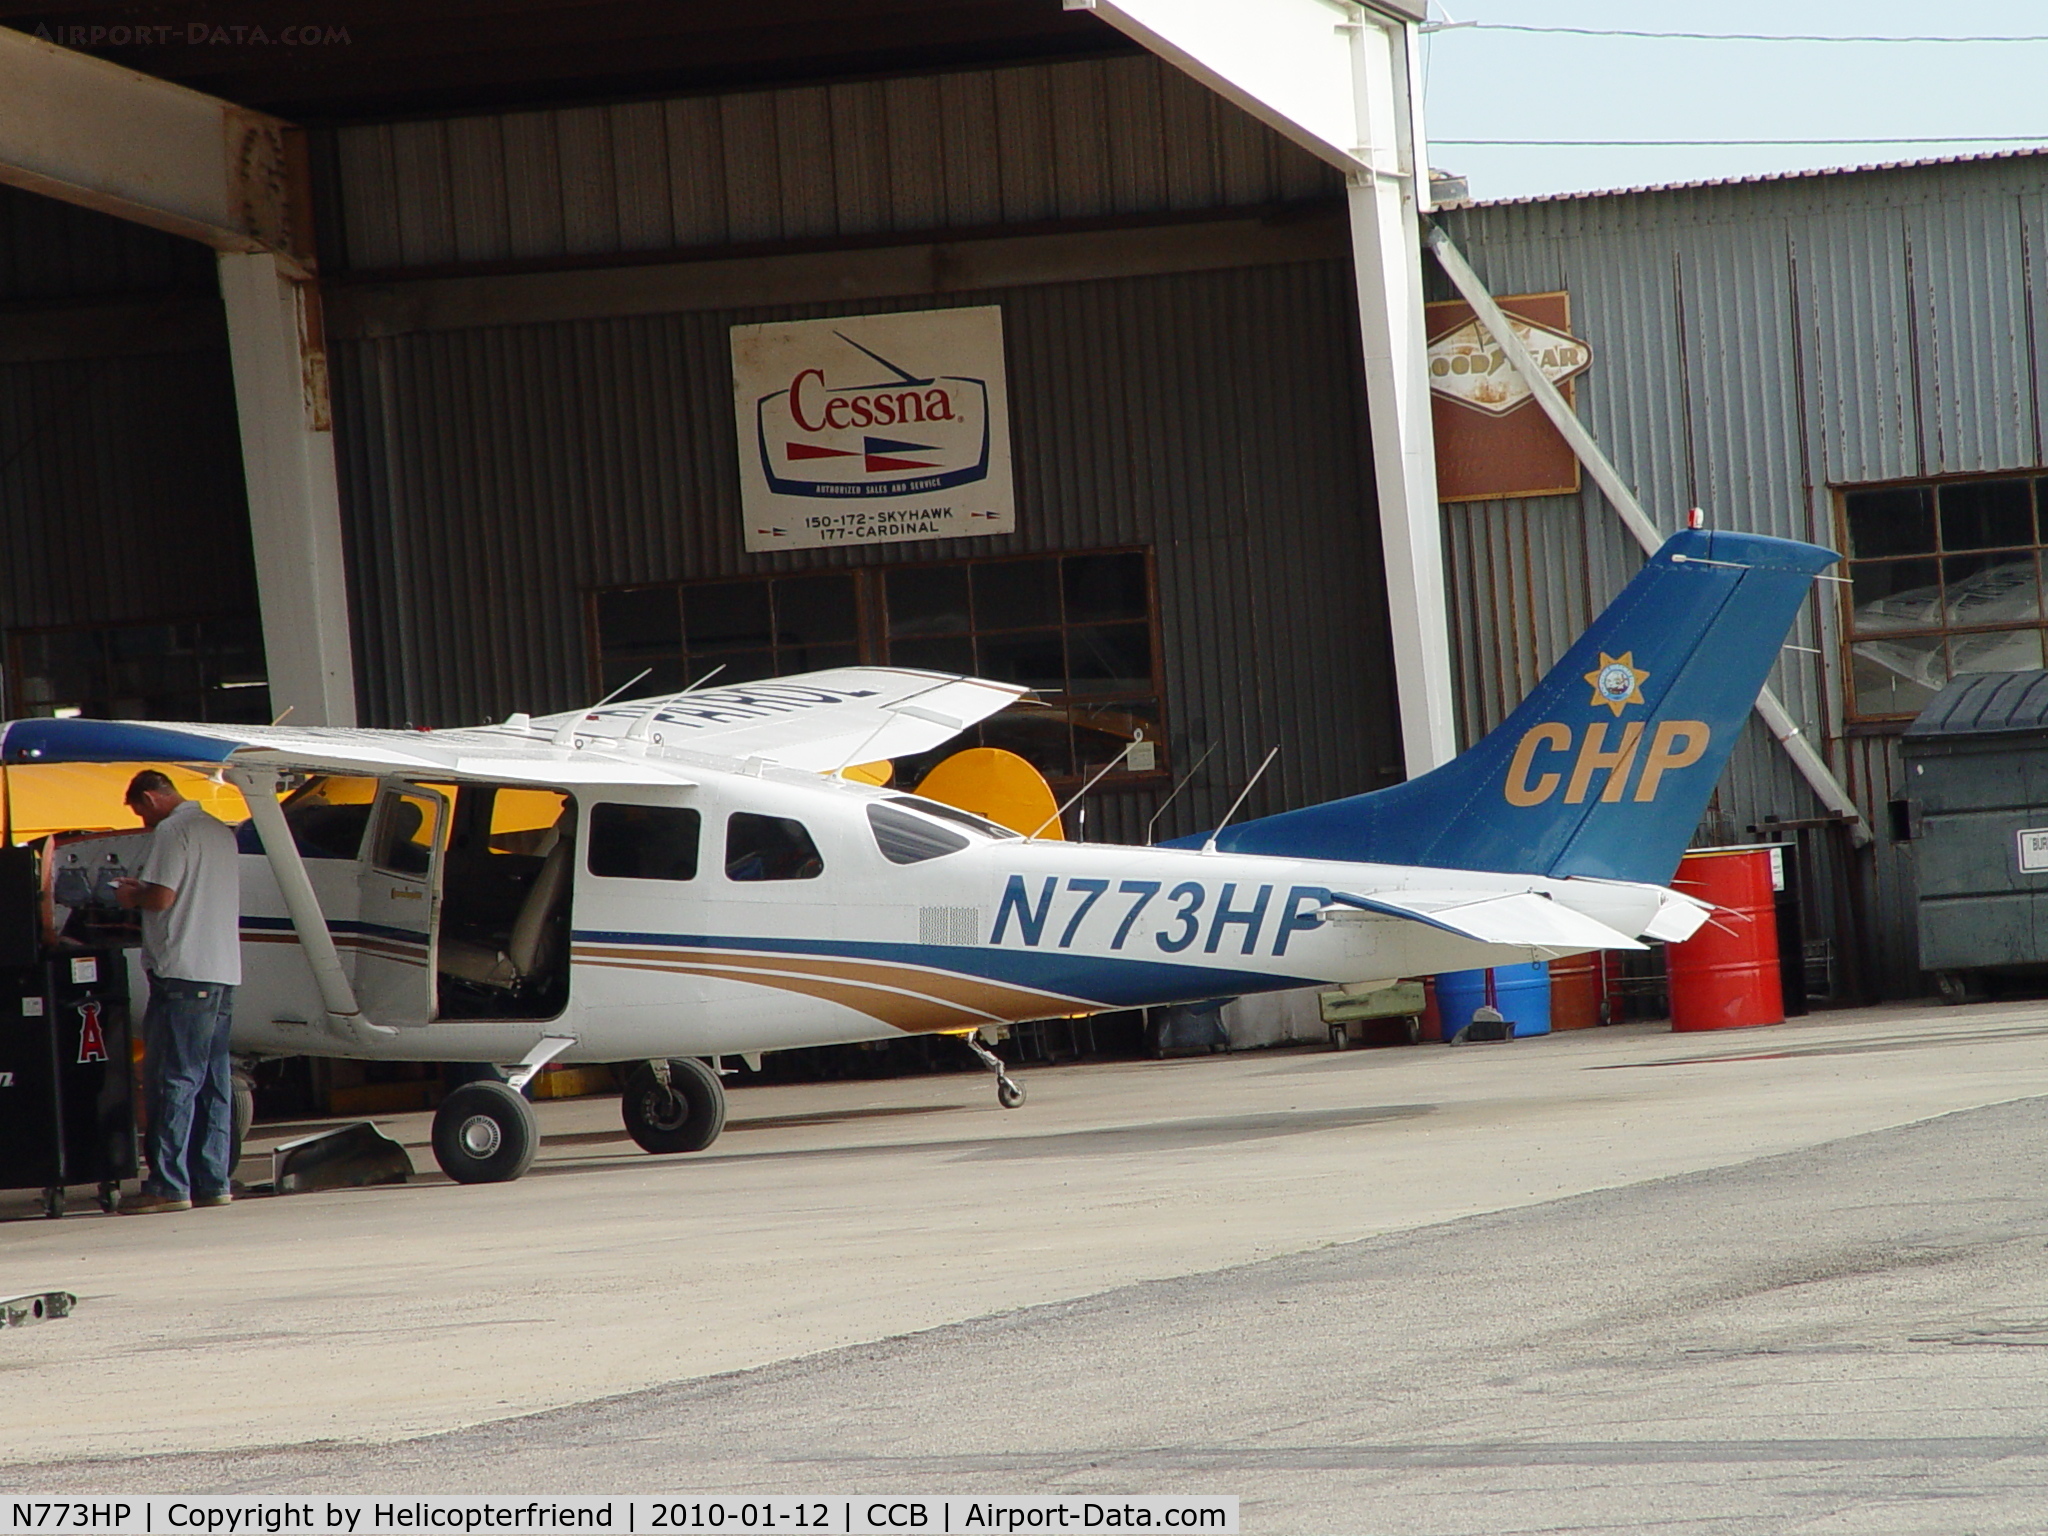 N773HP, 2000 Cessna T206H Turbo Stationair C/N T20608180, Parked at Foothill Aircraft Sales & Service